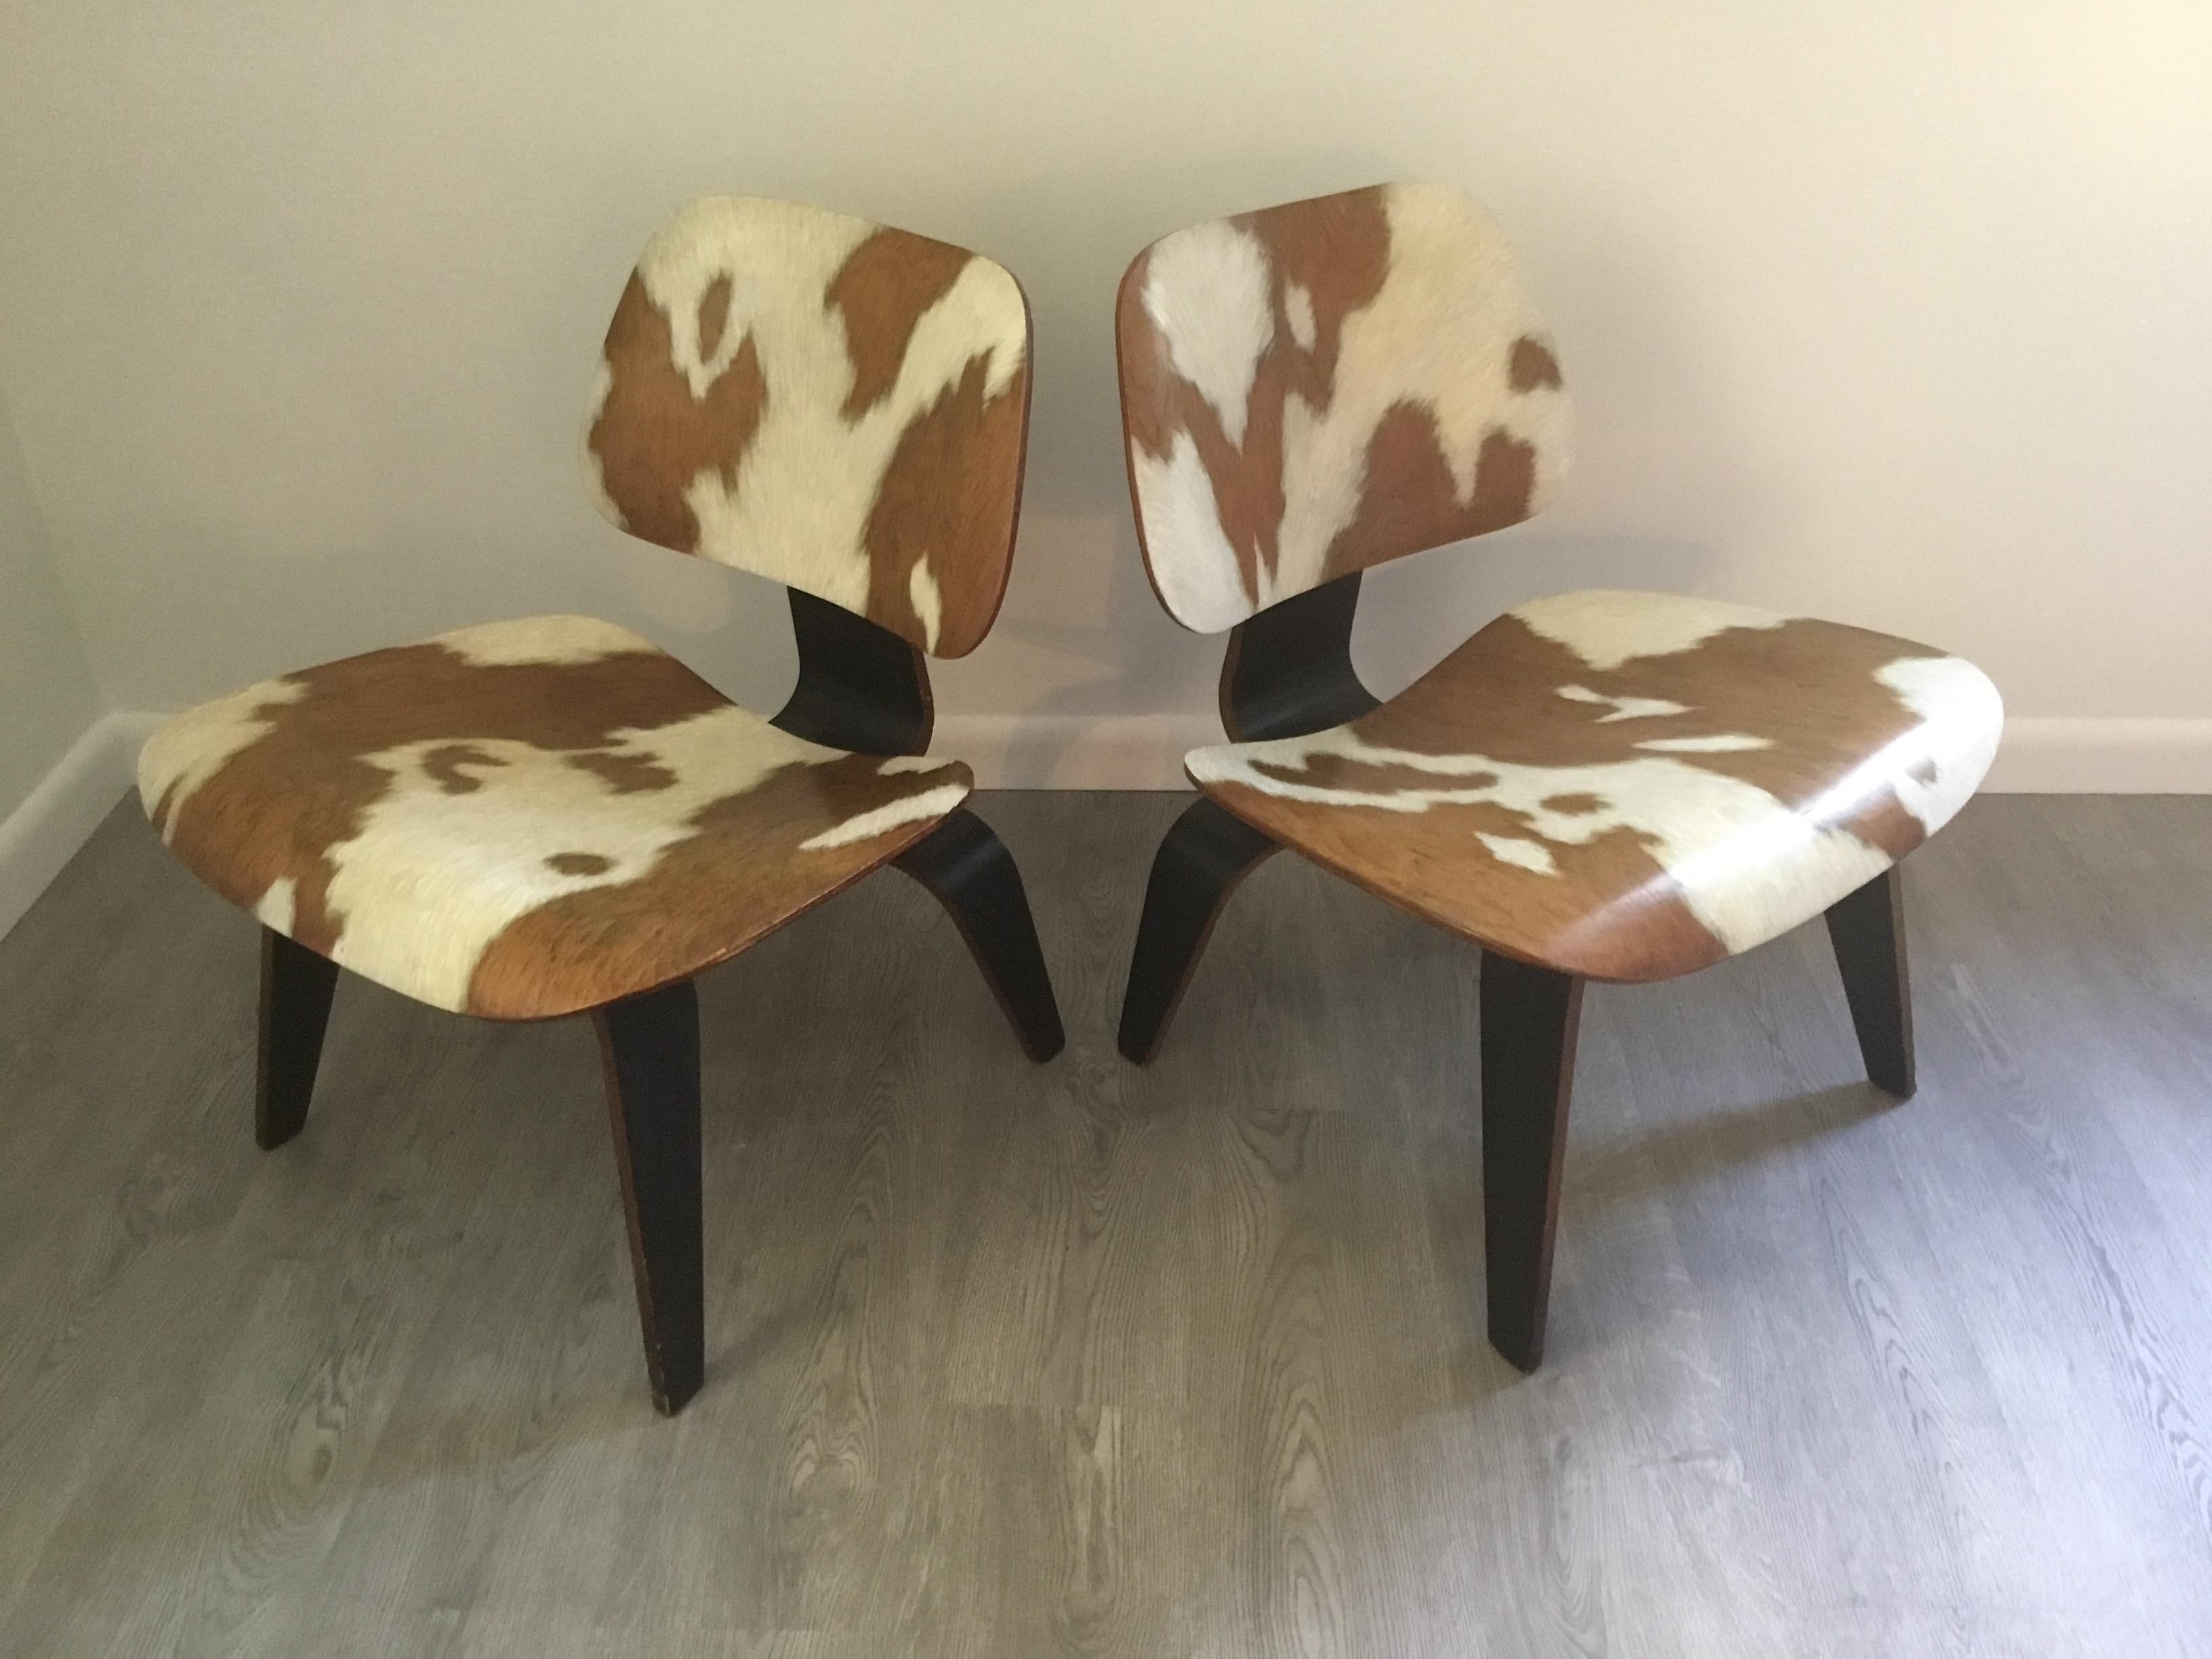 Pair of red stained LCW chairs by Charles and Ray Eames.
Faux cowhide finish by artist Lynn Curlee.
The chairs were acquired in 1969. They are possibly original issue, they were damaged with peeling and losses to the veneer on the front edge of both